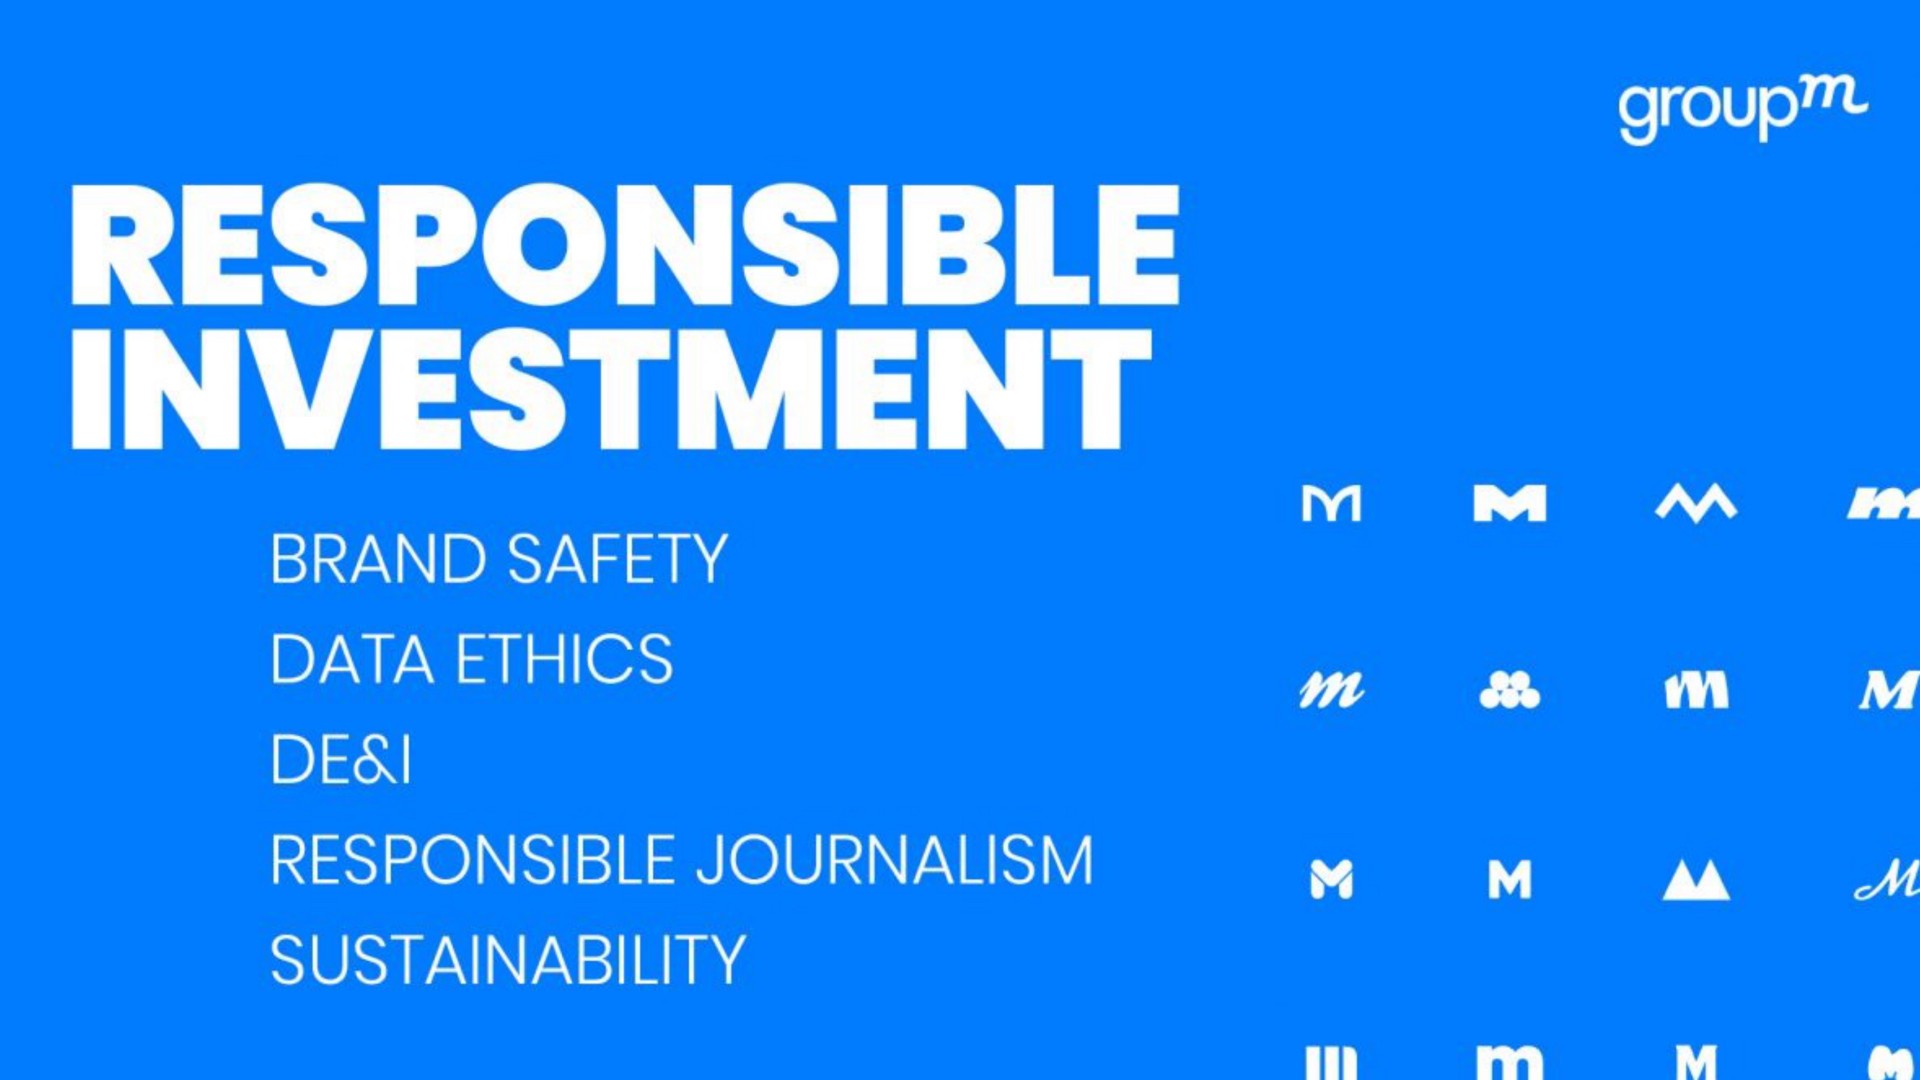 responsible investment brand safety data ethics desi responsible journalism a | WPP